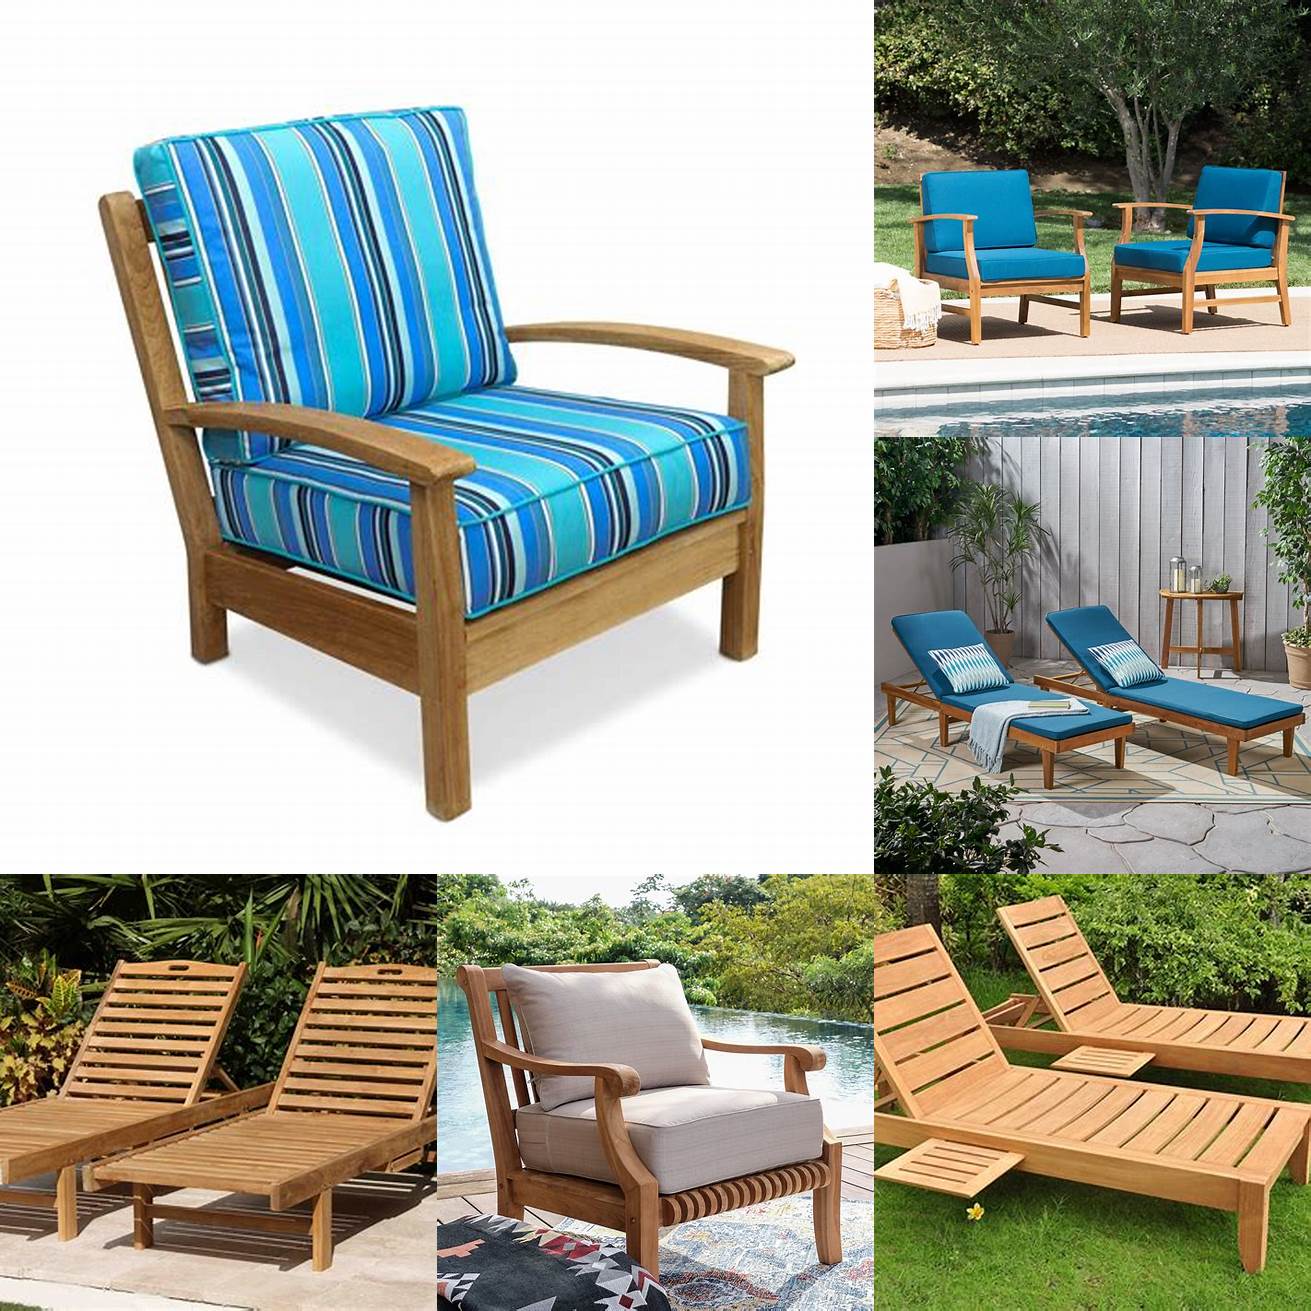 Teak wood lounge chairs with blue cushions